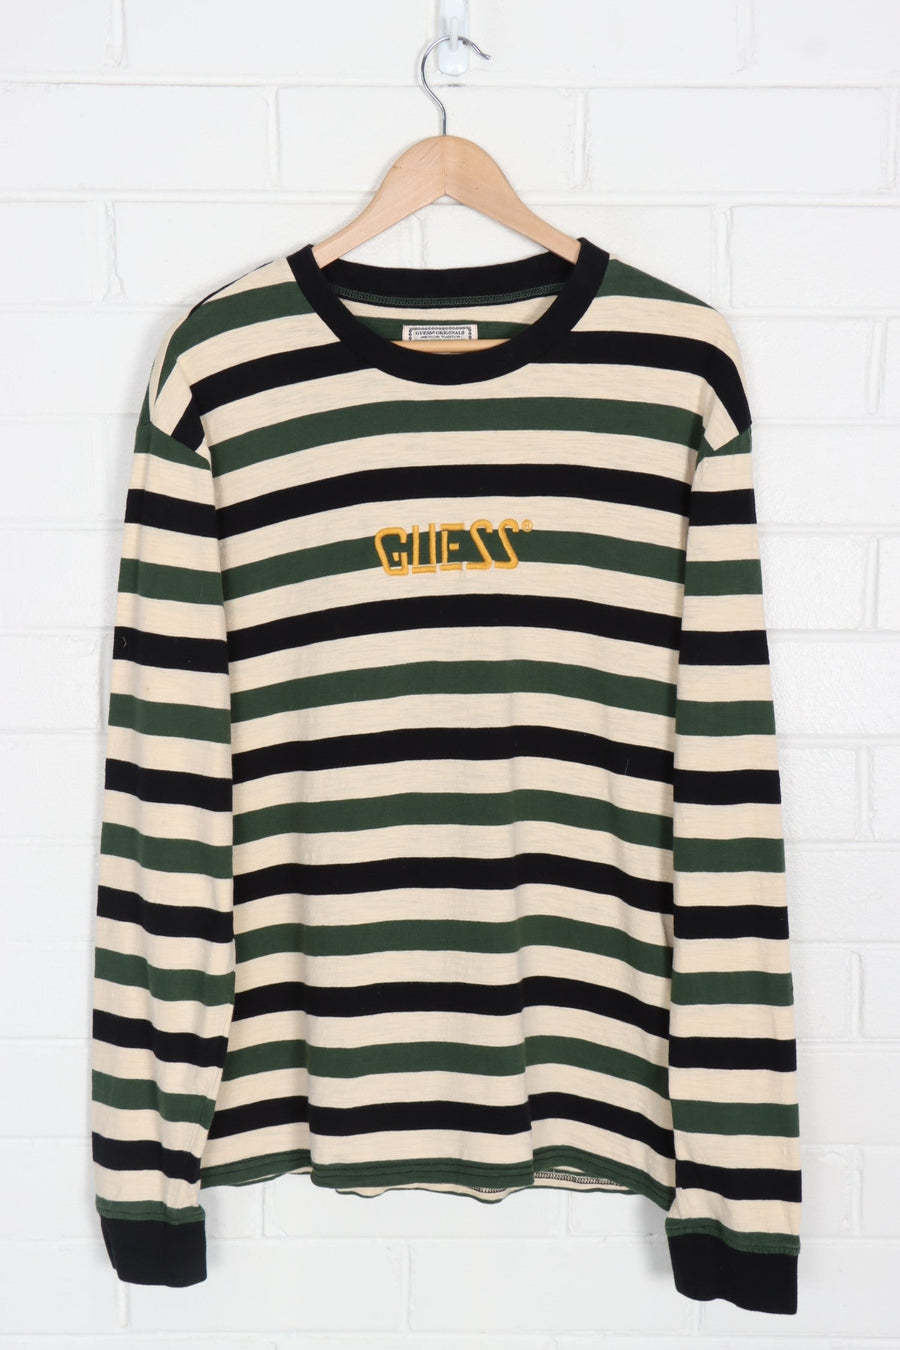 GUESS Embroidered Green Black & Beige Striped Long Sleeve T-Shirt (L-XL)